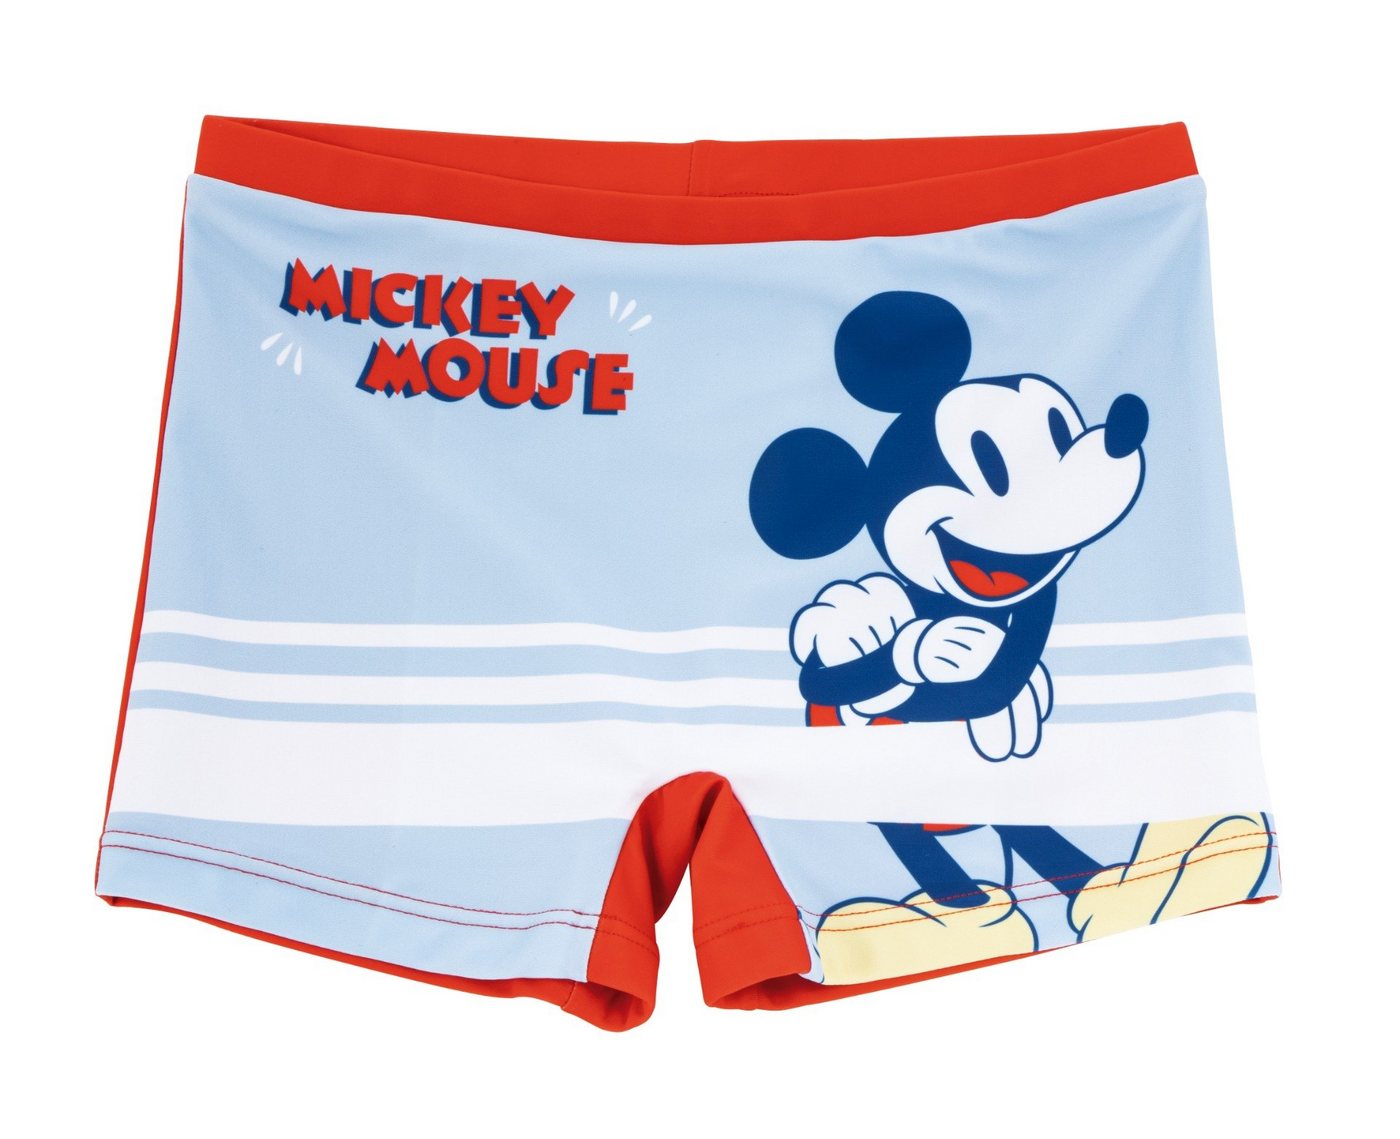 Disney Mickey Mouse Badepants Mickey Maus Jungen Kinder Badehose Gr. 104 bis 128 von Disney Mickey Mouse